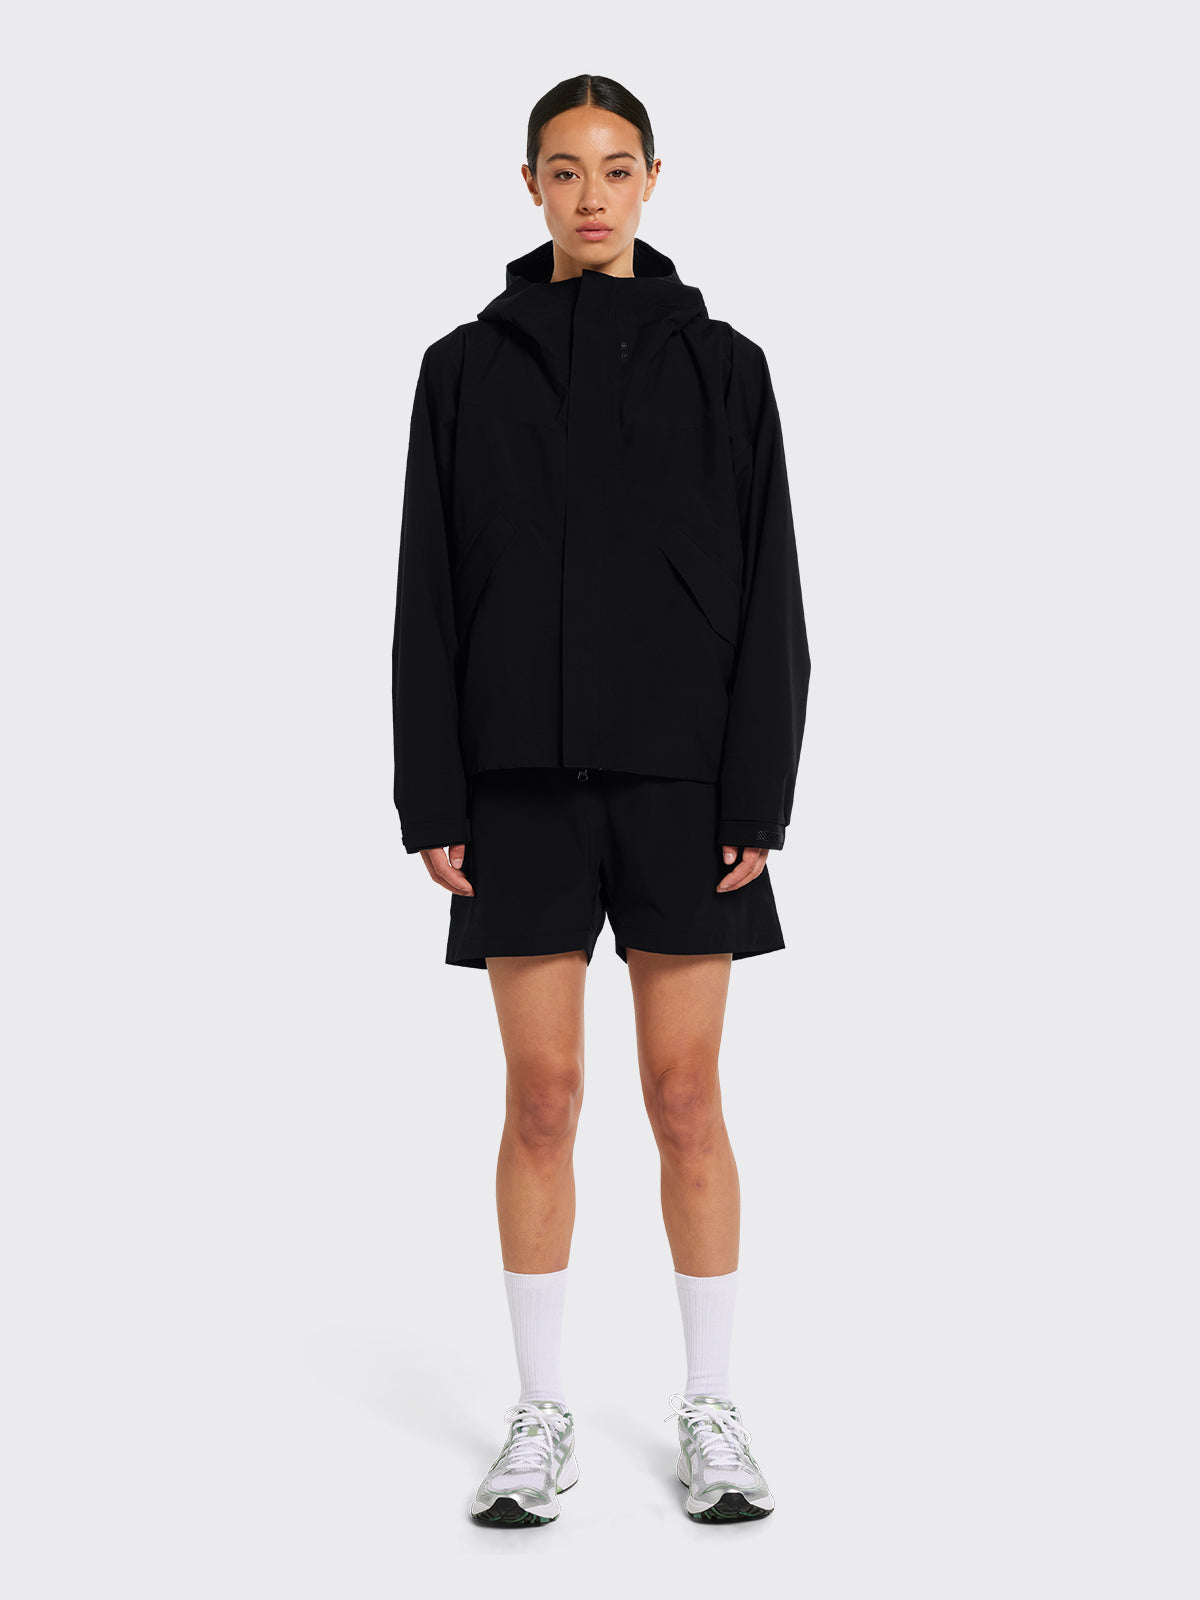 Woman wearing in Synes jacket in Black by Blæst